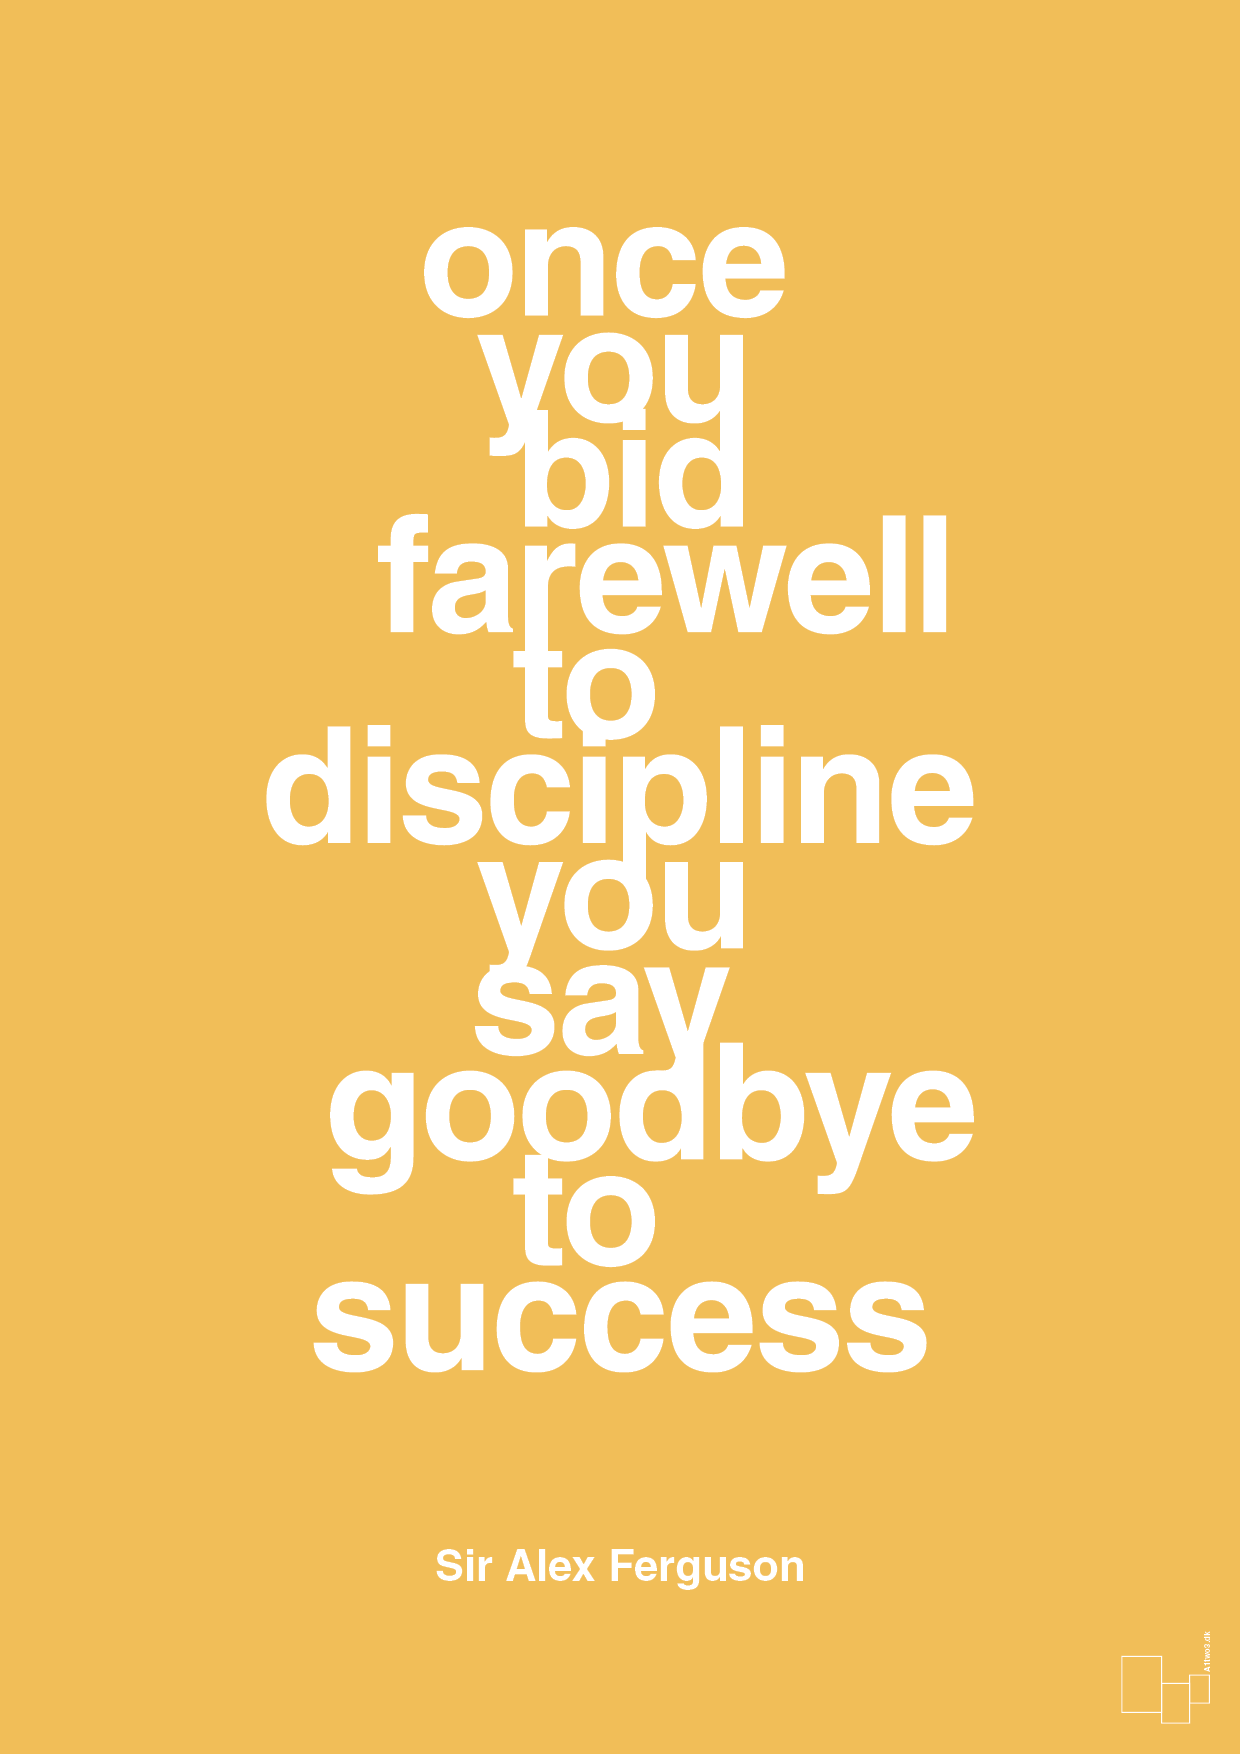 once you bid farewell to discipline you say goodbye to success - Plakat med Citater i Honeycomb